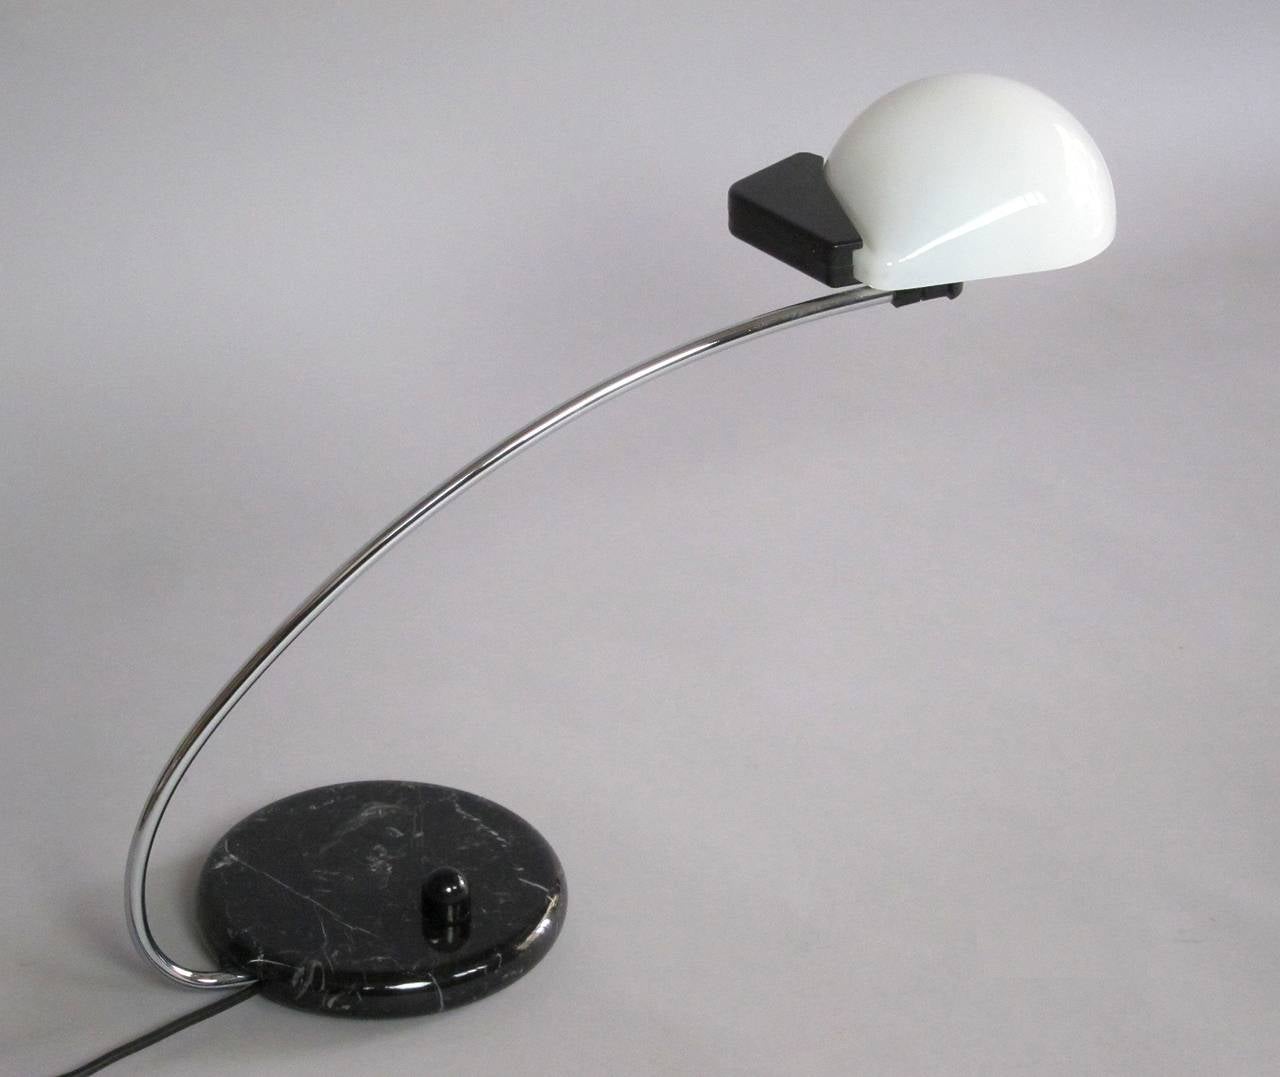 Heavy table lamp with opaline glass shade, designed by Bruno Gecchelin for Oluce, Italy 1977, rare version with black marble base.
Low-volt halogen light with two level brightness.